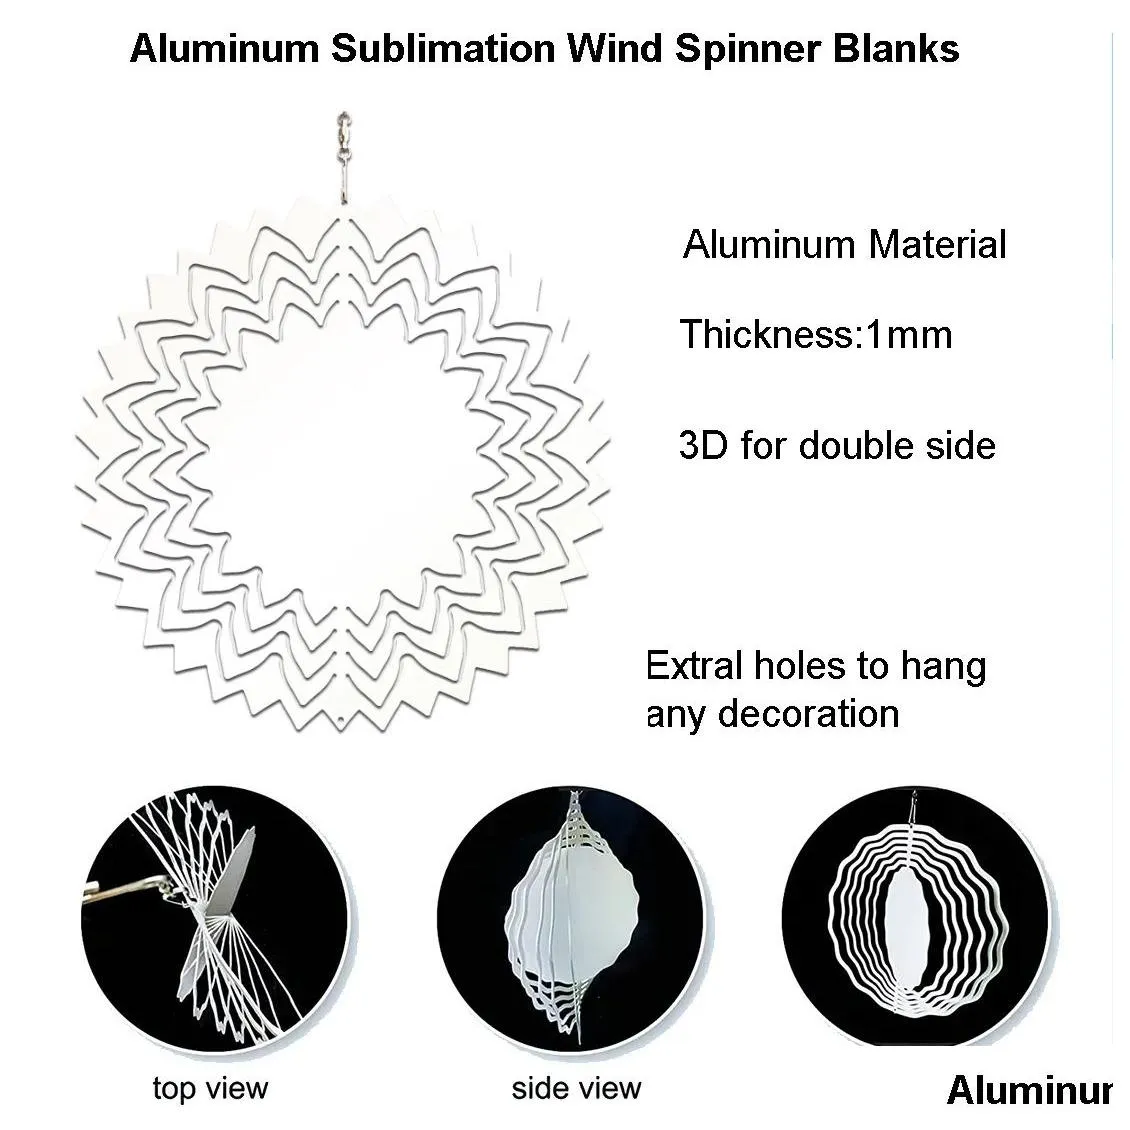 10 inch aluminum 3d sublimation wind spinner blanks doublesided printable metal hanging decors for yard and garden art